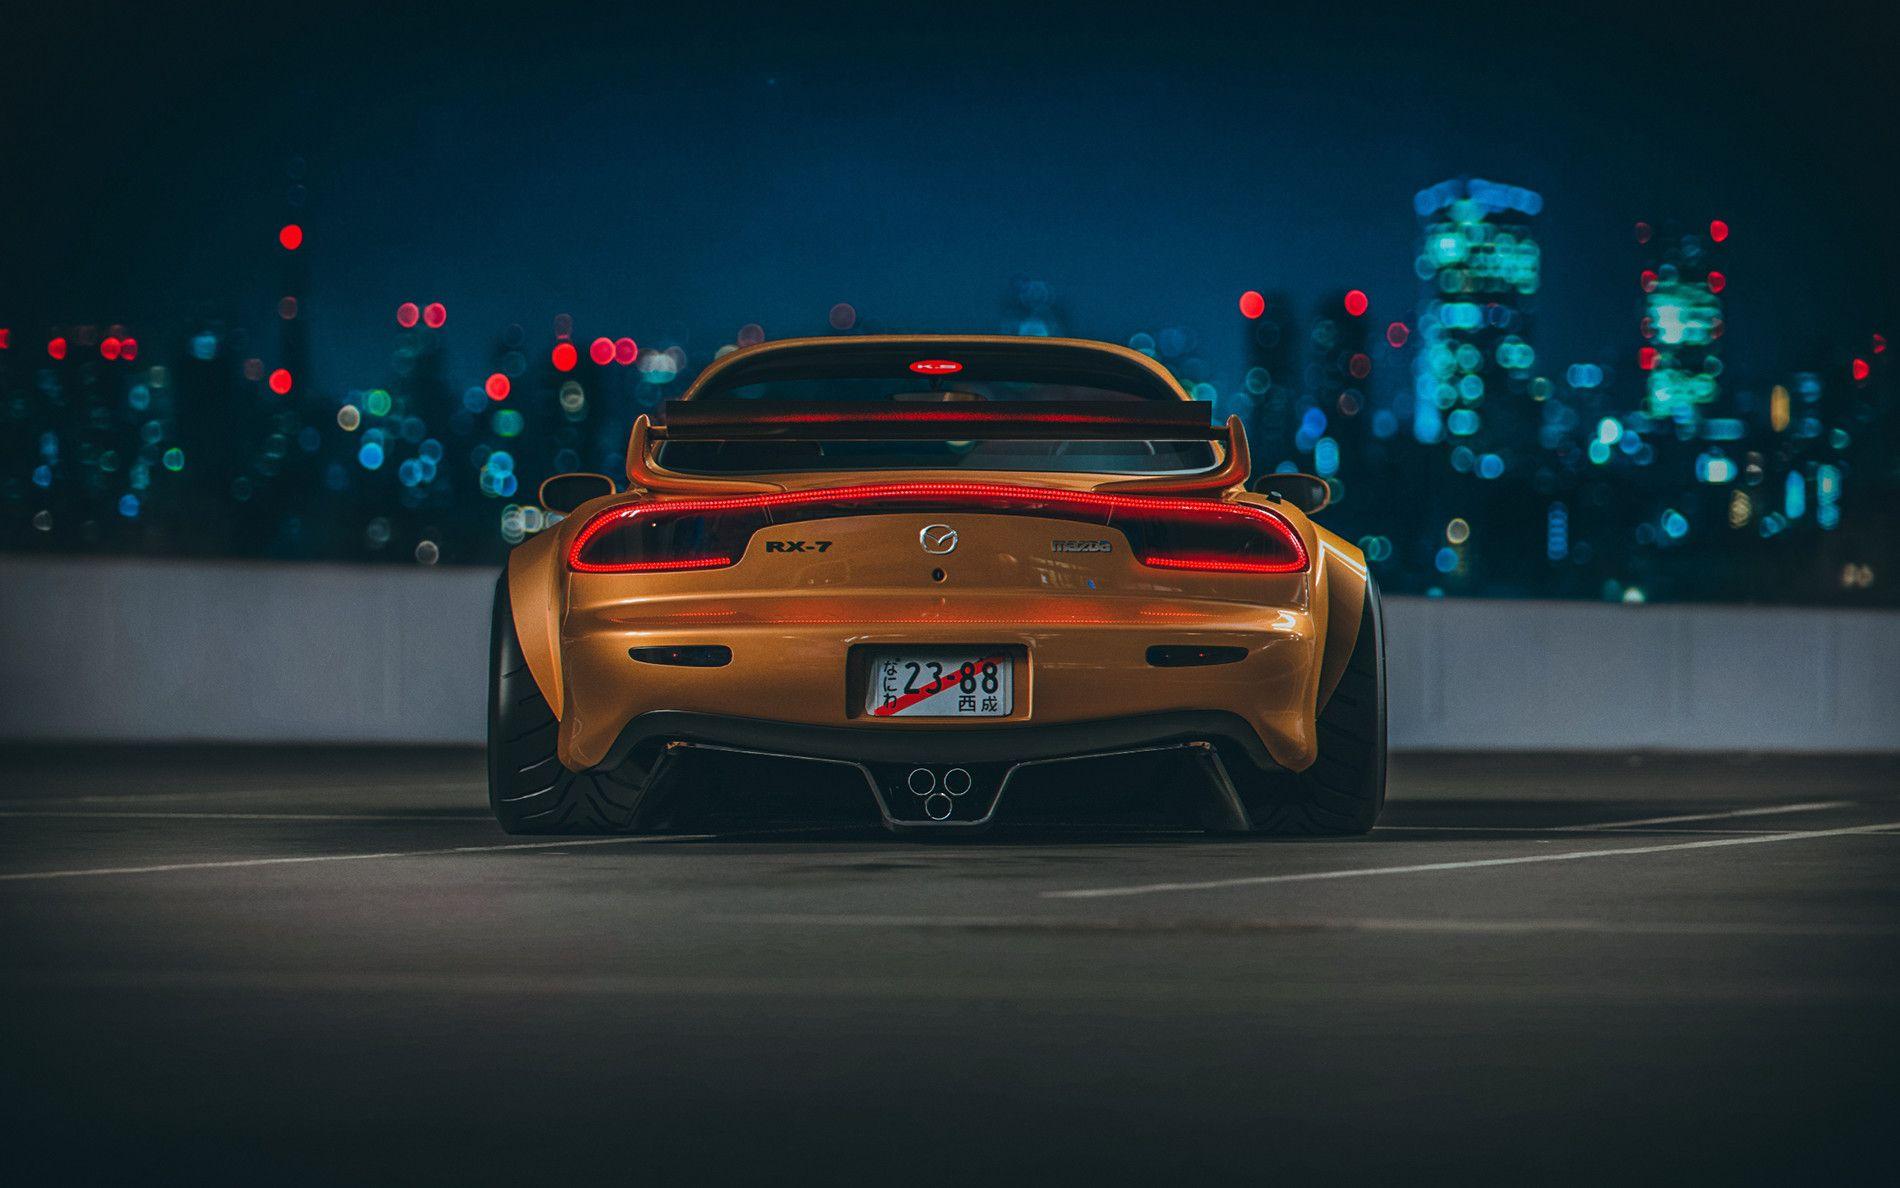 RX-7 Wallpapers - Top Free RX-7 Backgrounds - WallpaperAccess